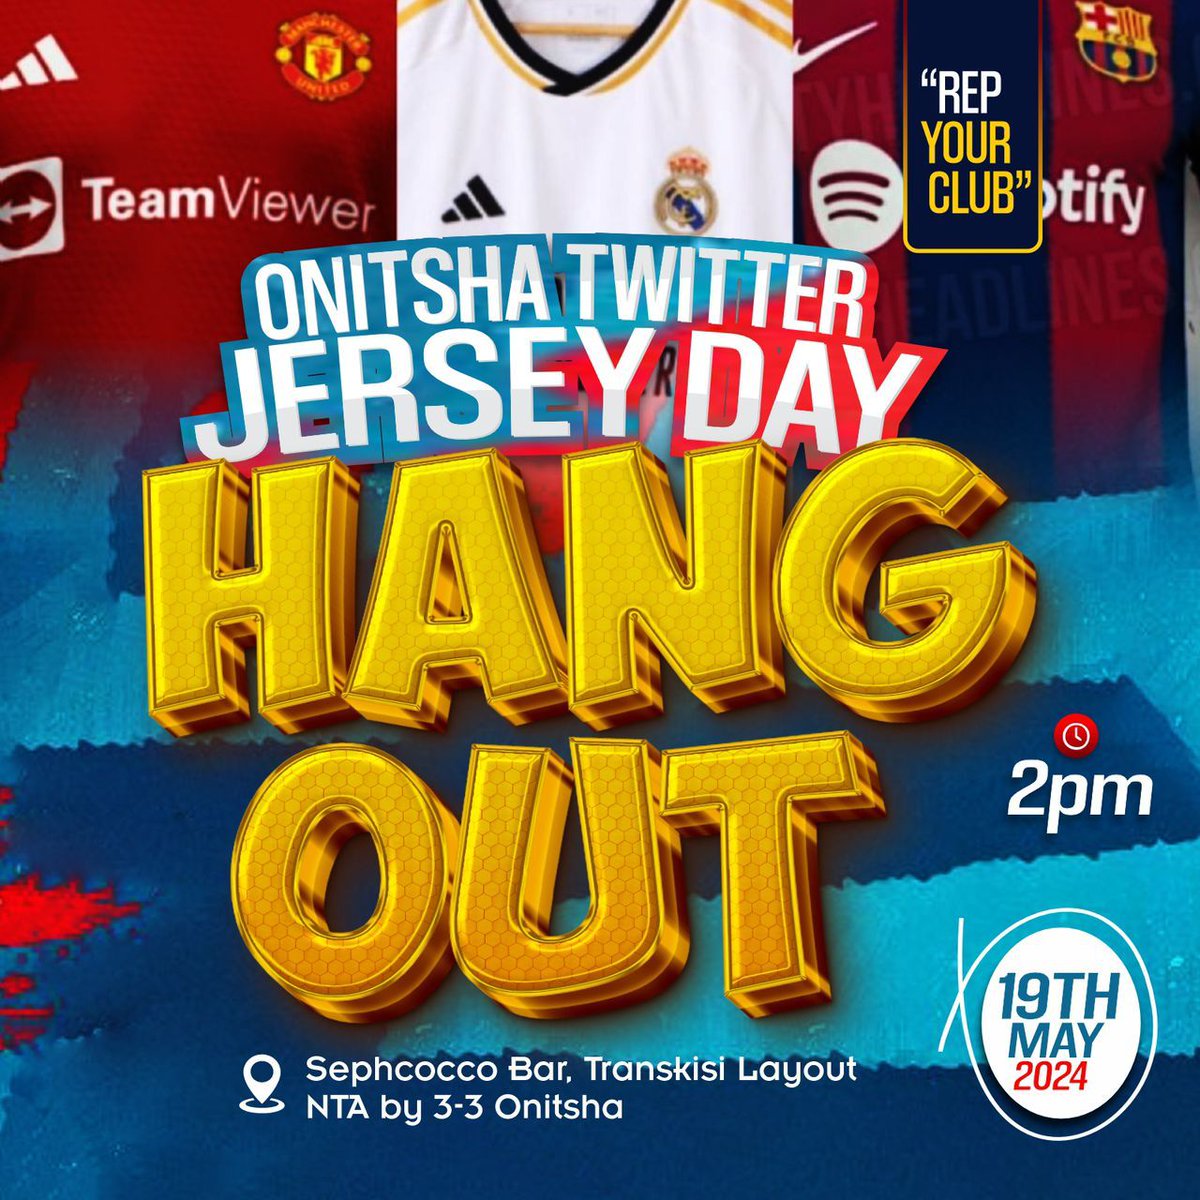 Two days to go💃💃💃. Come and unwind with the community this Sunday, it promises to be lots of fun and bants. Don't miss this for anything. Join the conversation too using the tags #OnitshaTwitterJerseyHangout #RepYourClub #WazobiaFMOnitsha